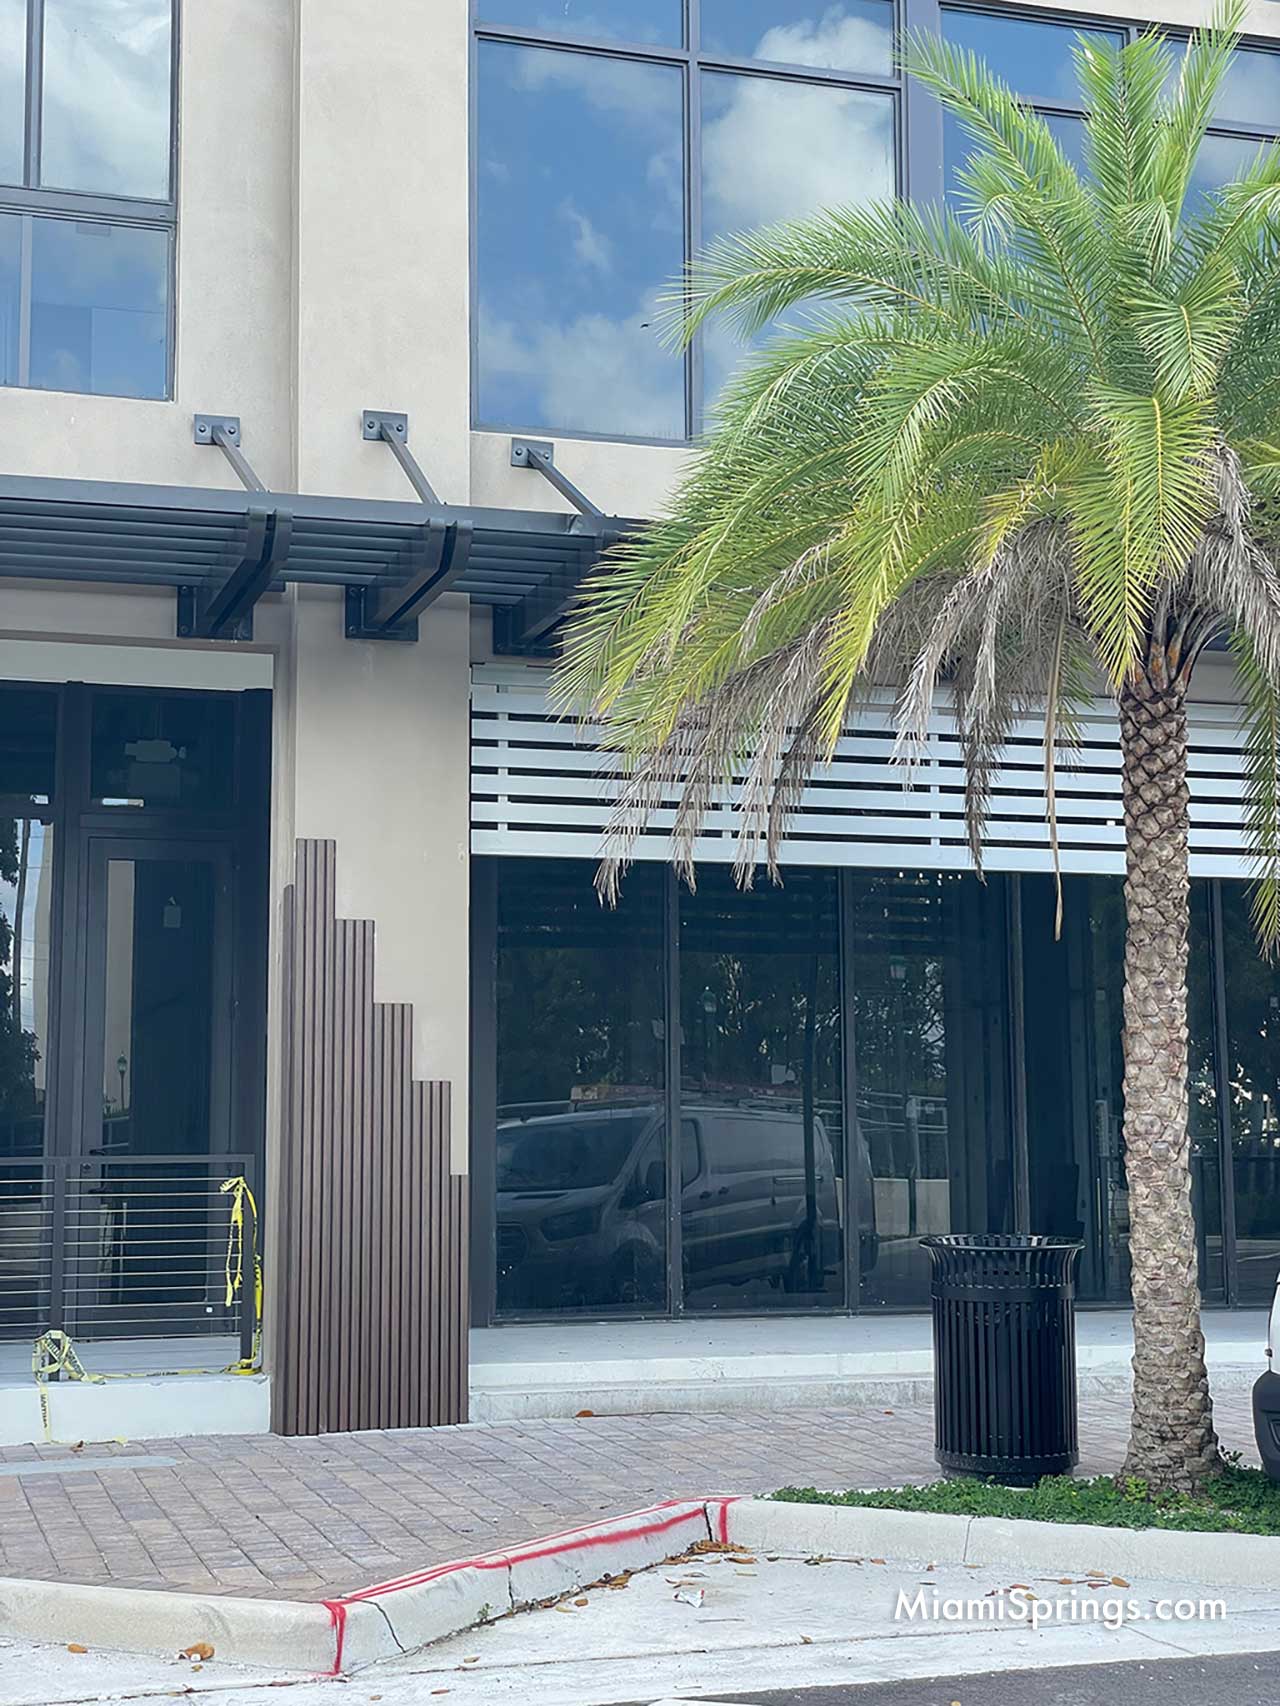 Metal Facade added to the Miami Springs Town Center